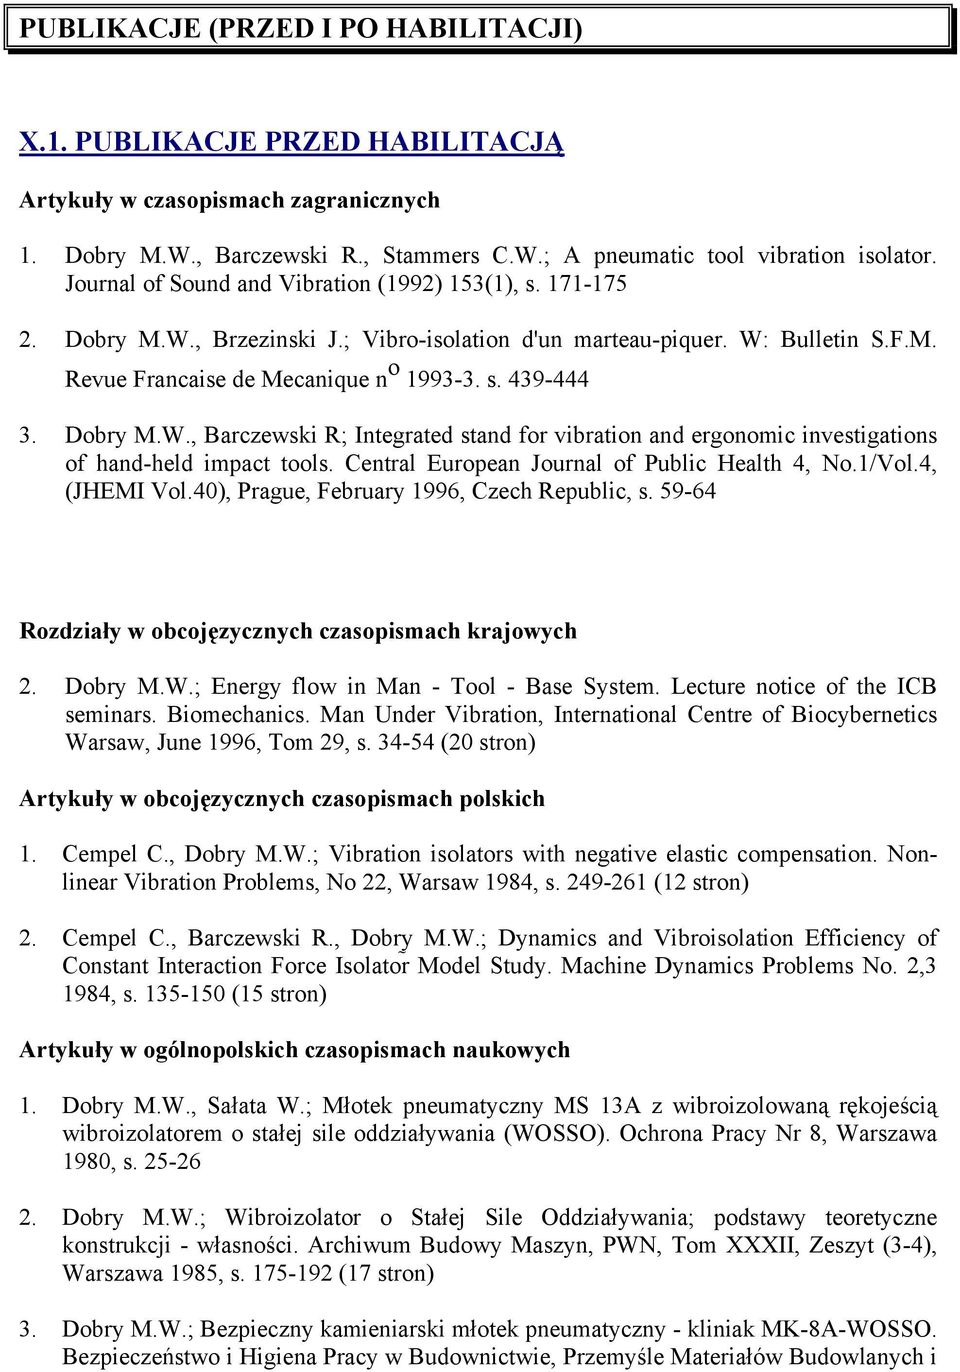 Dobry M.W., Barczewski R; Integrated stand for vibration and ergonomic investigations of hand-held impact tools. Central European Journal of Public Health 4, No.1/Vol.4, (JHEMI Vol.